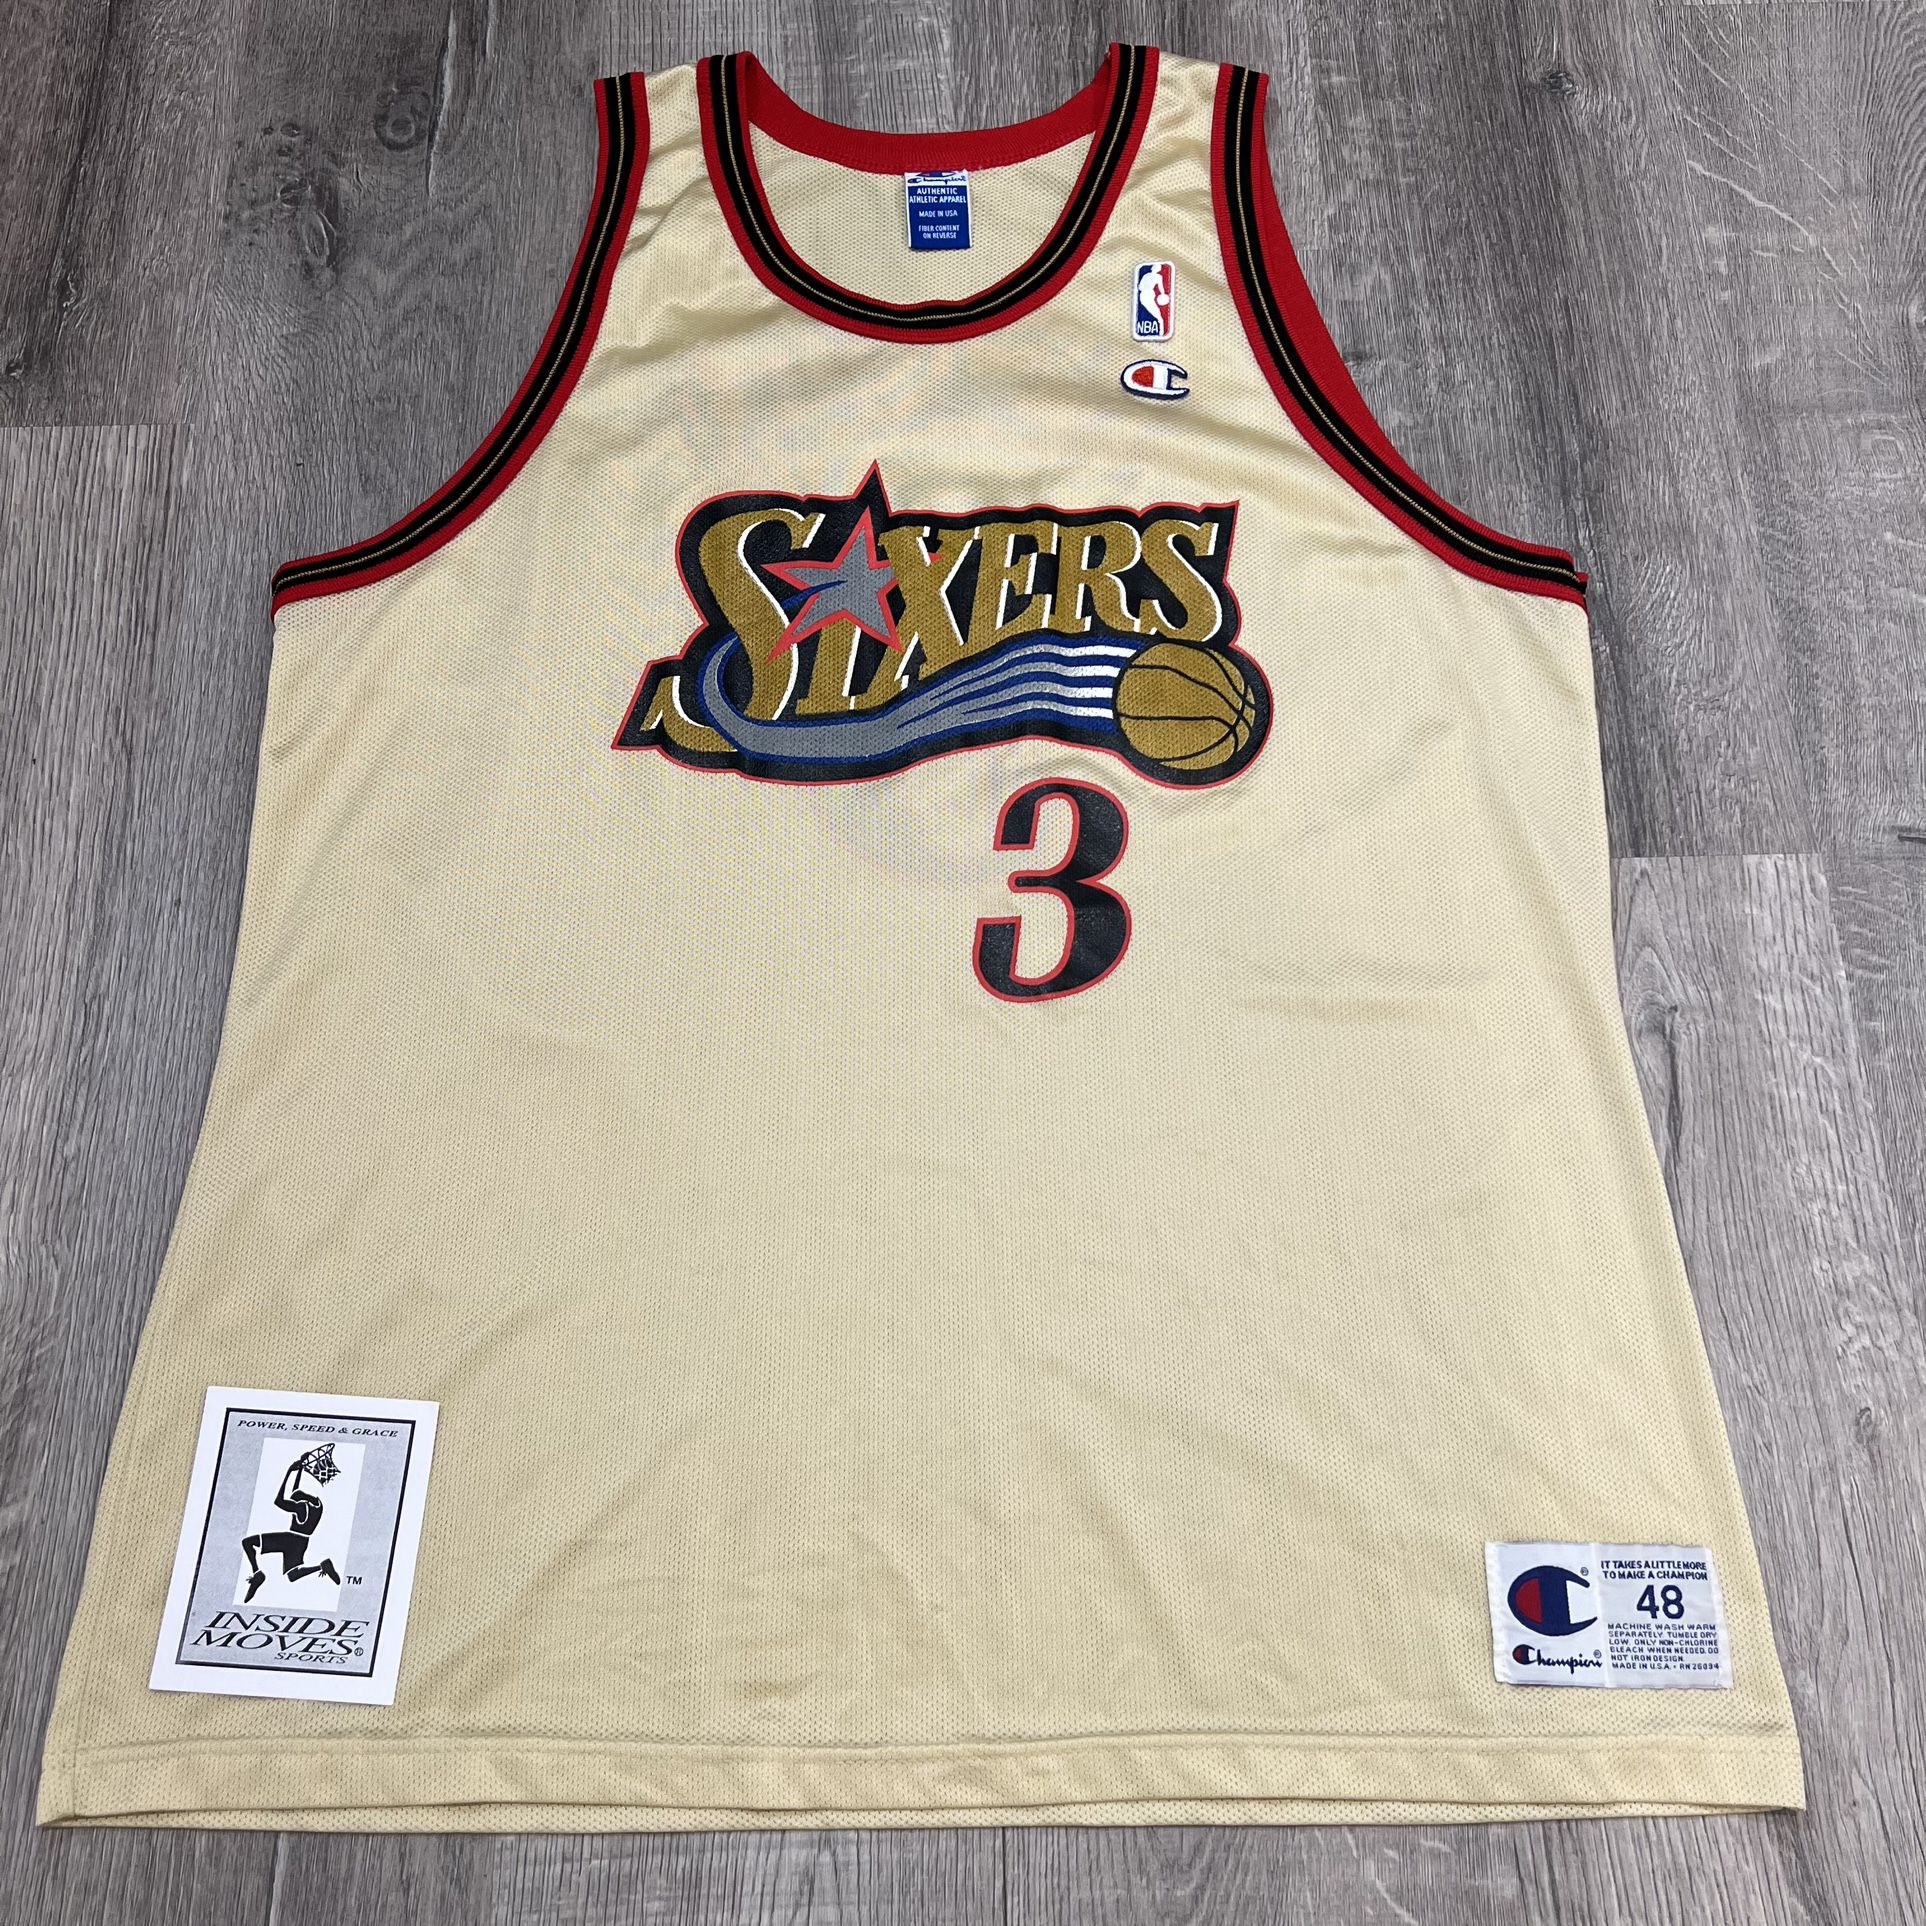 Vintage NBA 50th Anniversary Champion Jerseys - MJ 48, Iverson 48, Kobe  Sold for Sale in Pasadena, CA - OfferUp